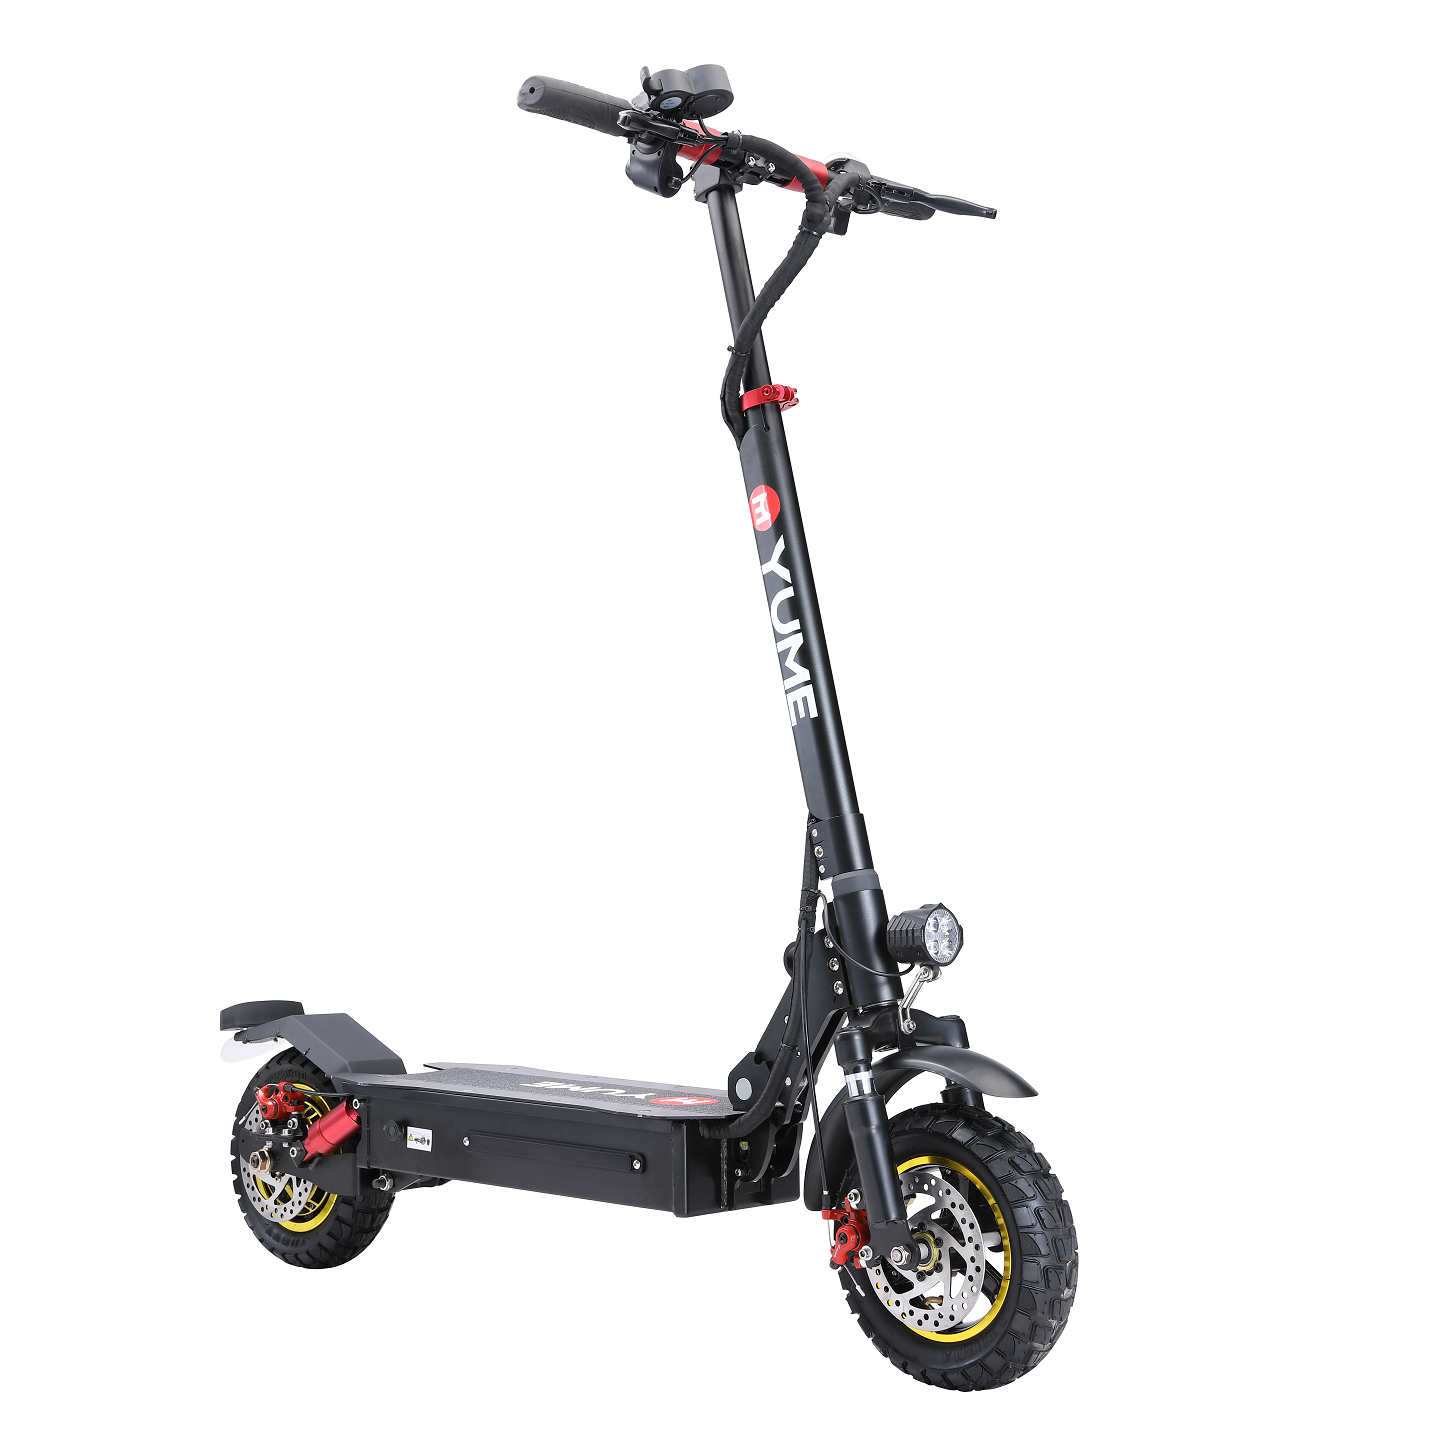 Find EU DIRECT YUME S10 Plus 48V 1000W 21AH 10inch Tire Folding Electric Scooter 45 65KM Mileage 120KG Max Load Scooter for Sale on Gipsybee.com with cryptocurrencies